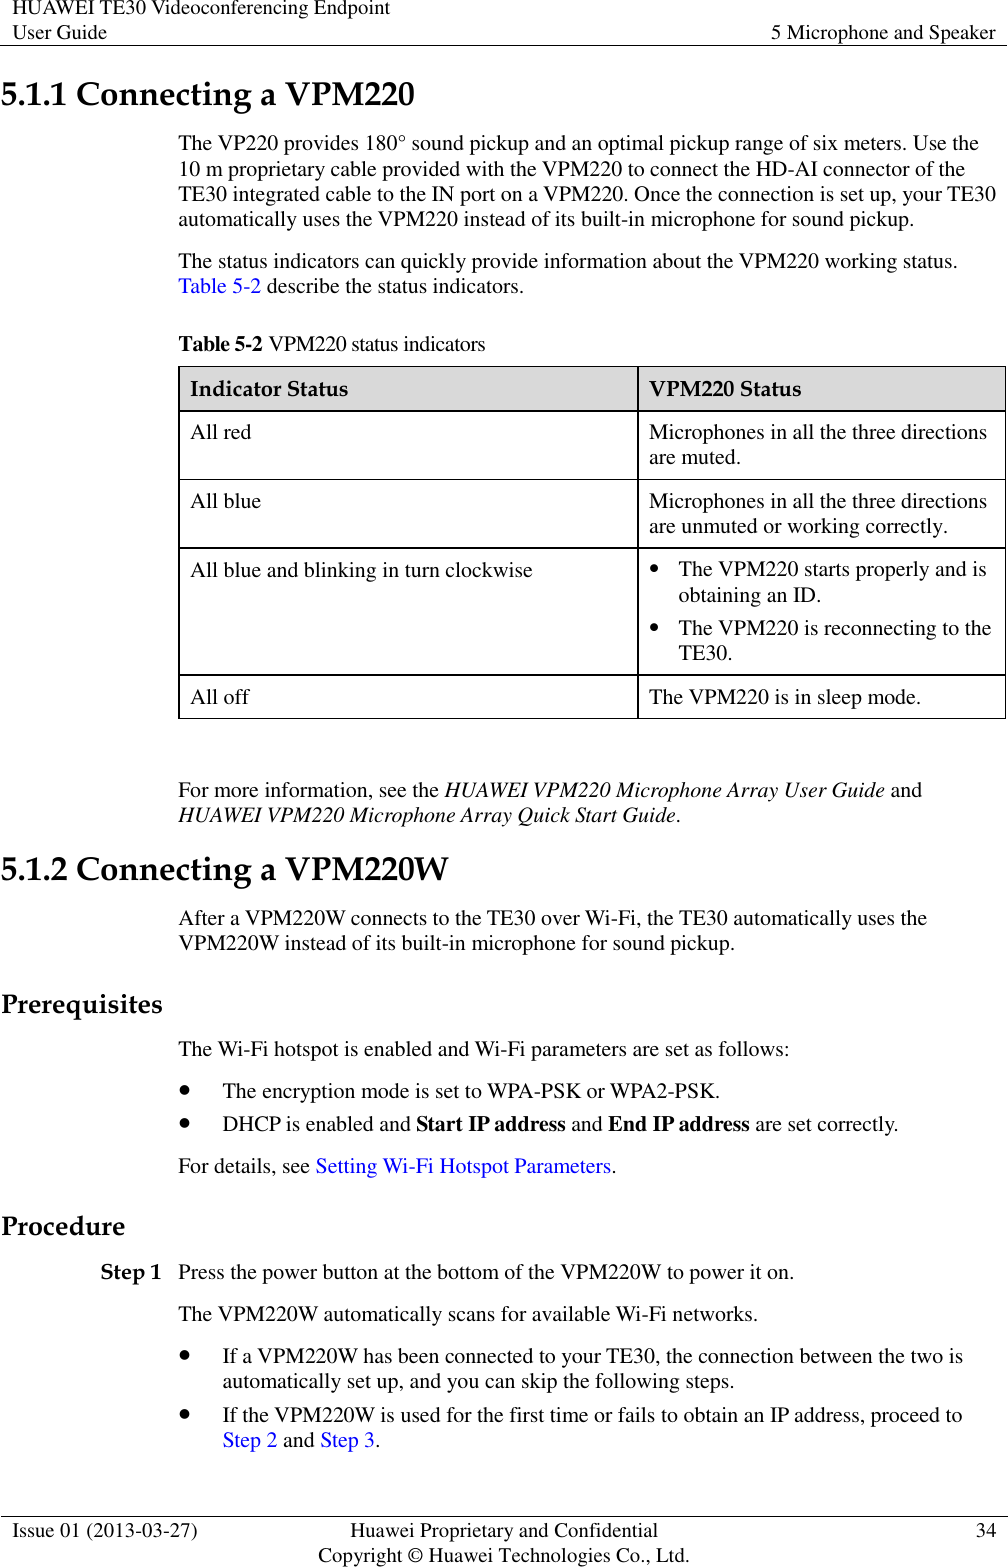 HUAWEI TE30 Videoconferencing Endpoint User Guide 5 Microphone and Speaker  Issue 01 (2013-03-27) Huawei Proprietary and Confidential                                     Copyright © Huawei Technologies Co., Ltd. 34  5.1.1 Connecting a VPM220 The VP220 provides 180° sound pickup and an optimal pickup range of six meters. Use the 10 m proprietary cable provided with the VPM220 to connect the HD-AI connector of the TE30 integrated cable to the IN port on a VPM220. Once the connection is set up, your TE30 automatically uses the VPM220 instead of its built-in microphone for sound pickup. The status indicators can quickly provide information about the VPM220 working status. Table 5-2 describe the status indicators. Table 5-2 VPM220 status indicators Indicator Status VPM220 Status All red Microphones in all the three directions are muted. All blue Microphones in all the three directions are unmuted or working correctly. All blue and blinking in turn clockwise  The VPM220 starts properly and is obtaining an ID.  The VPM220 is reconnecting to the TE30. All off The VPM220 is in sleep mode.  For more information, see the HUAWEI VPM220 Microphone Array User Guide and HUAWEI VPM220 Microphone Array Quick Start Guide. 5.1.2 Connecting a VPM220W After a VPM220W connects to the TE30 over Wi-Fi, the TE30 automatically uses the VPM220W instead of its built-in microphone for sound pickup. Prerequisites The Wi-Fi hotspot is enabled and Wi-Fi parameters are set as follows:  The encryption mode is set to WPA-PSK or WPA2-PSK.  DHCP is enabled and Start IP address and End IP address are set correctly. For details, see Setting Wi-Fi Hotspot Parameters. Procedure Step 1 Press the power button at the bottom of the VPM220W to power it on. The VPM220W automatically scans for available Wi-Fi networks.  If a VPM220W has been connected to your TE30, the connection between the two is automatically set up, and you can skip the following steps.  If the VPM220W is used for the first time or fails to obtain an IP address, proceed to Step 2 and Step 3. 